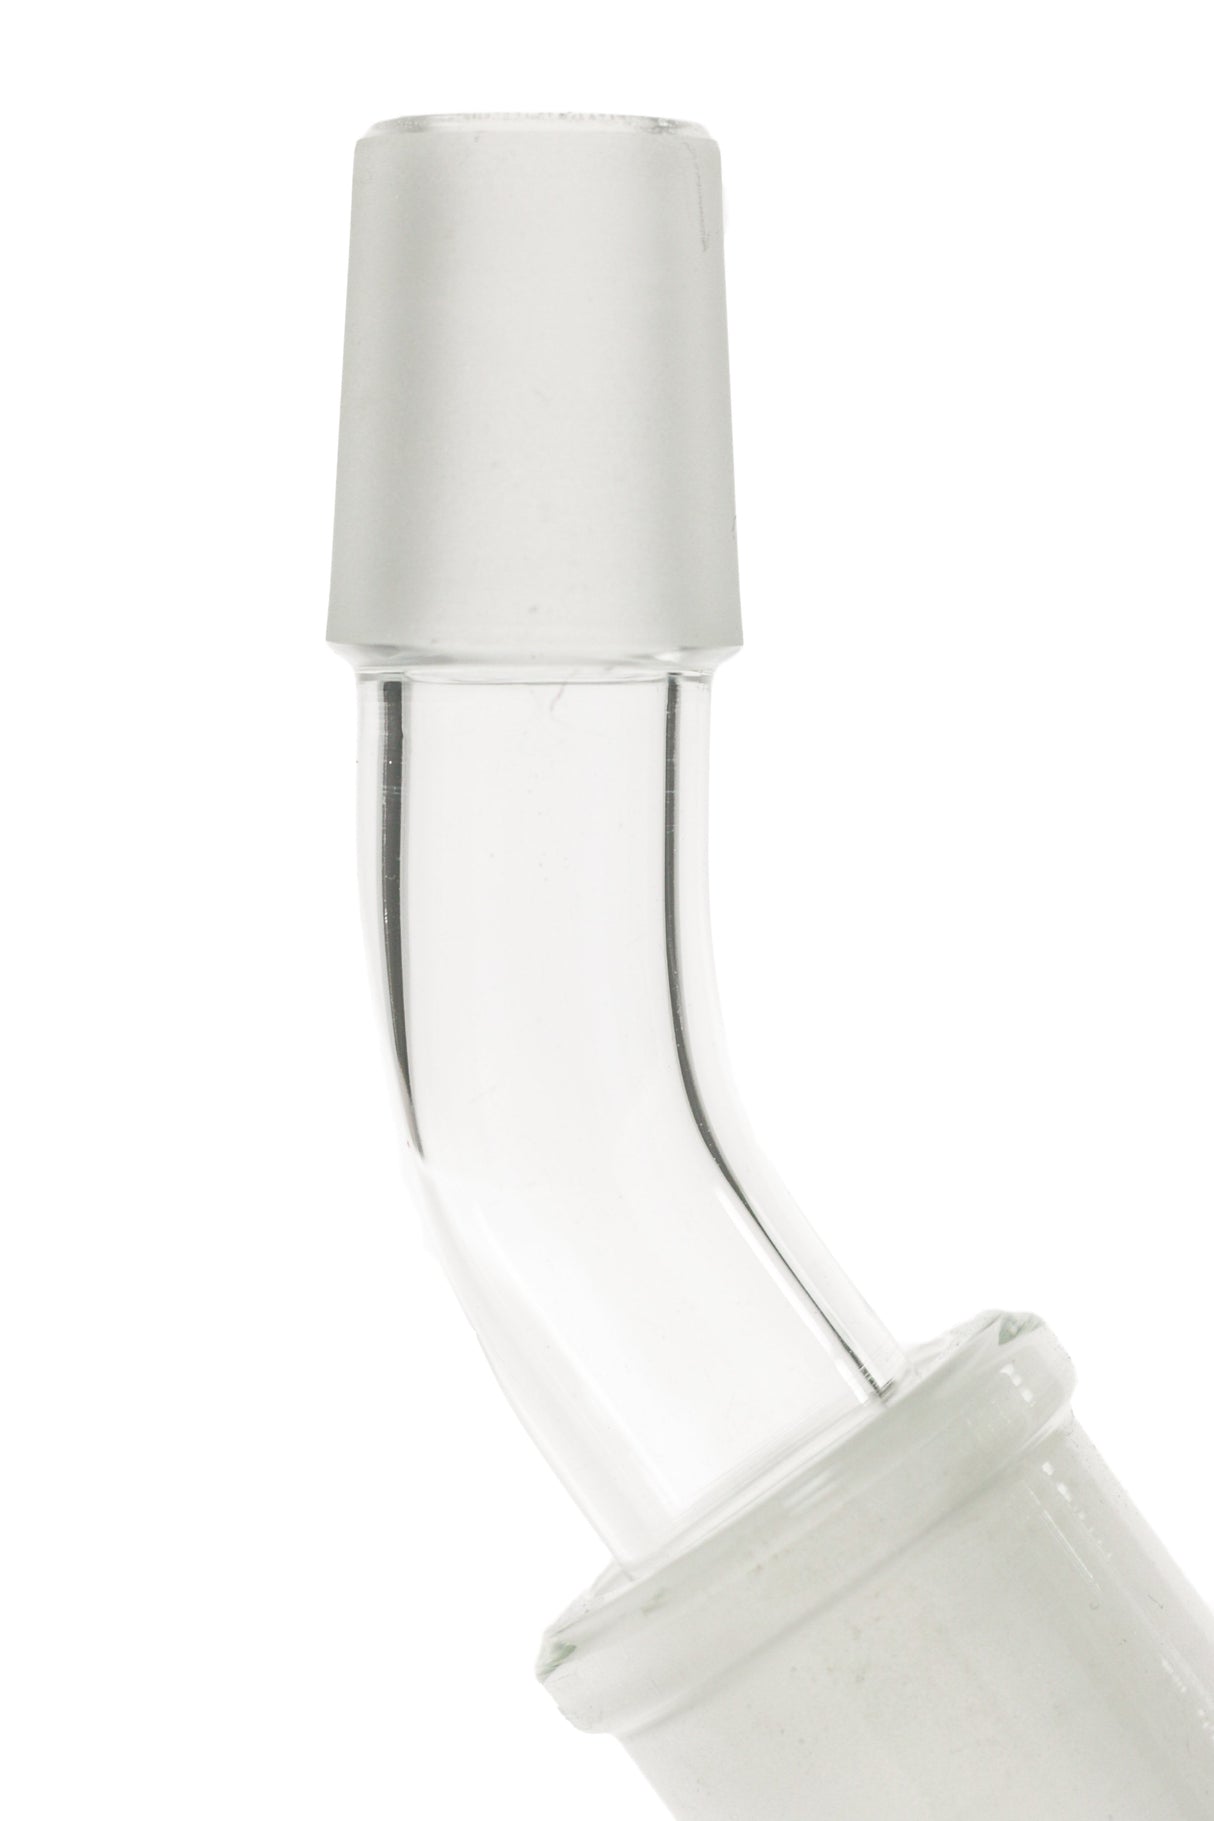 TAG - Thick Ass Glass Angle Adapter for Bongs, Clear Quartz, Close-up Side View